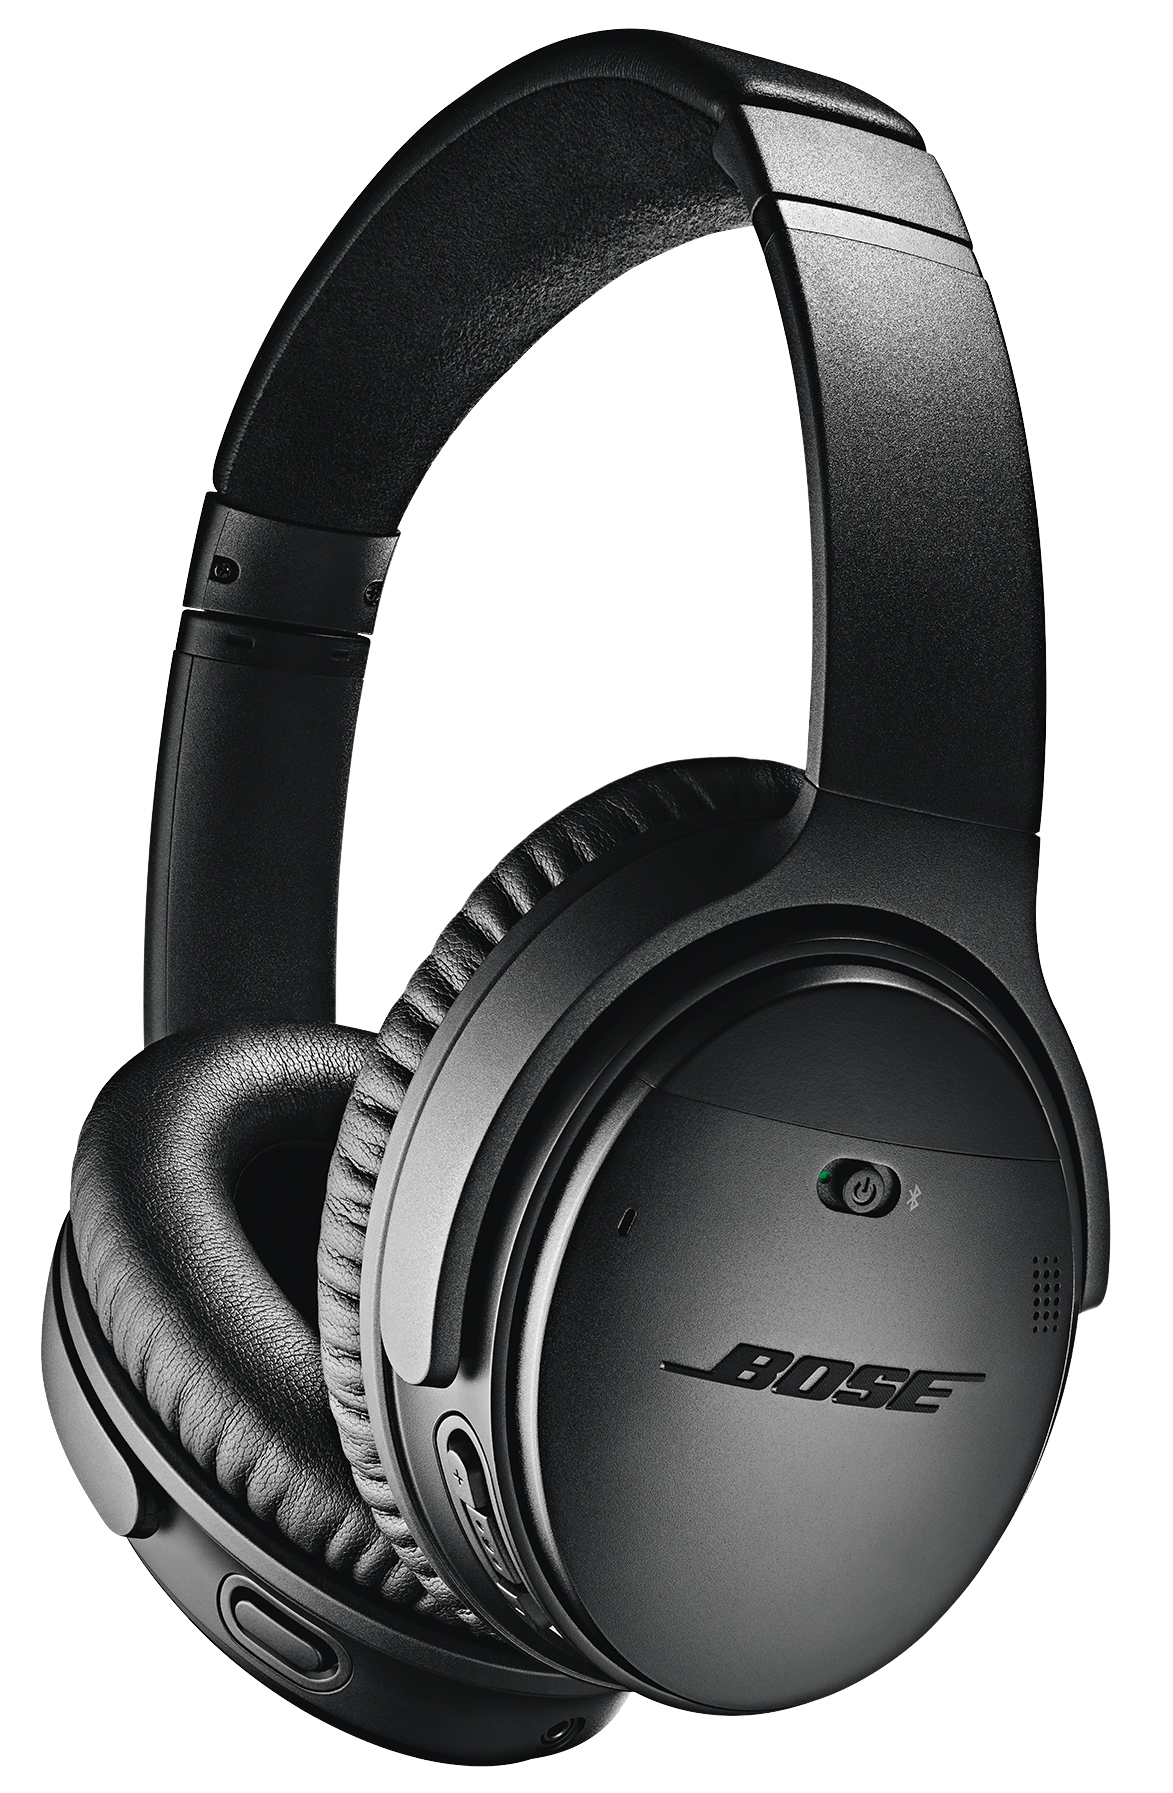 Bose Quietcomfort 35 Ii : Bose QuietComfort 35 II : At 310g, they are